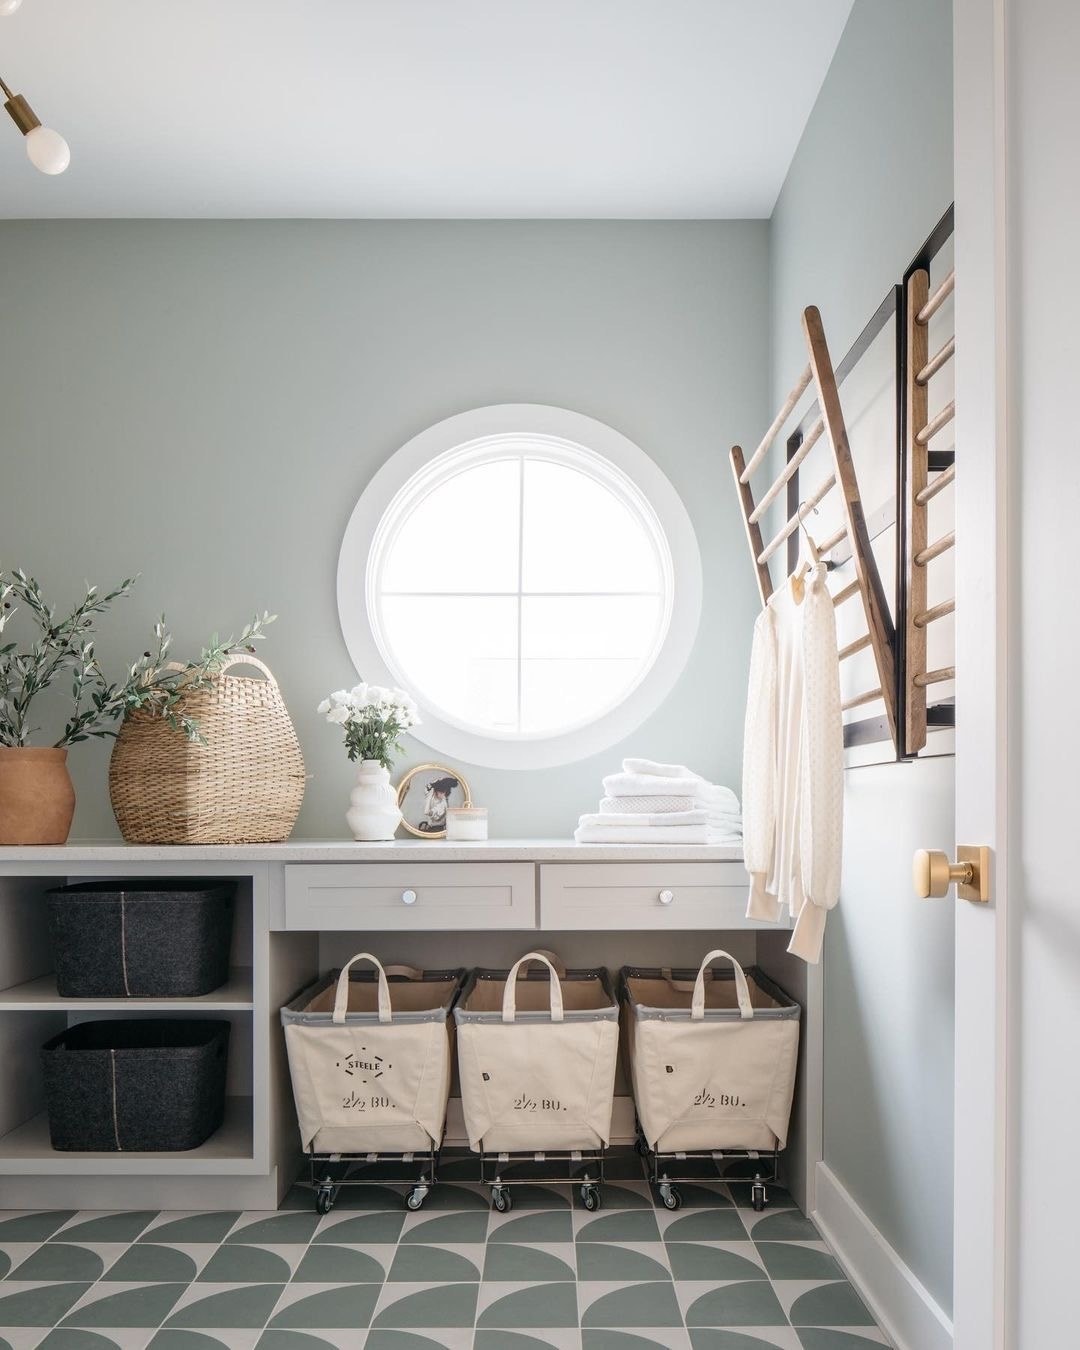 A white laundry room window in the shape of a circle brings natural light in.